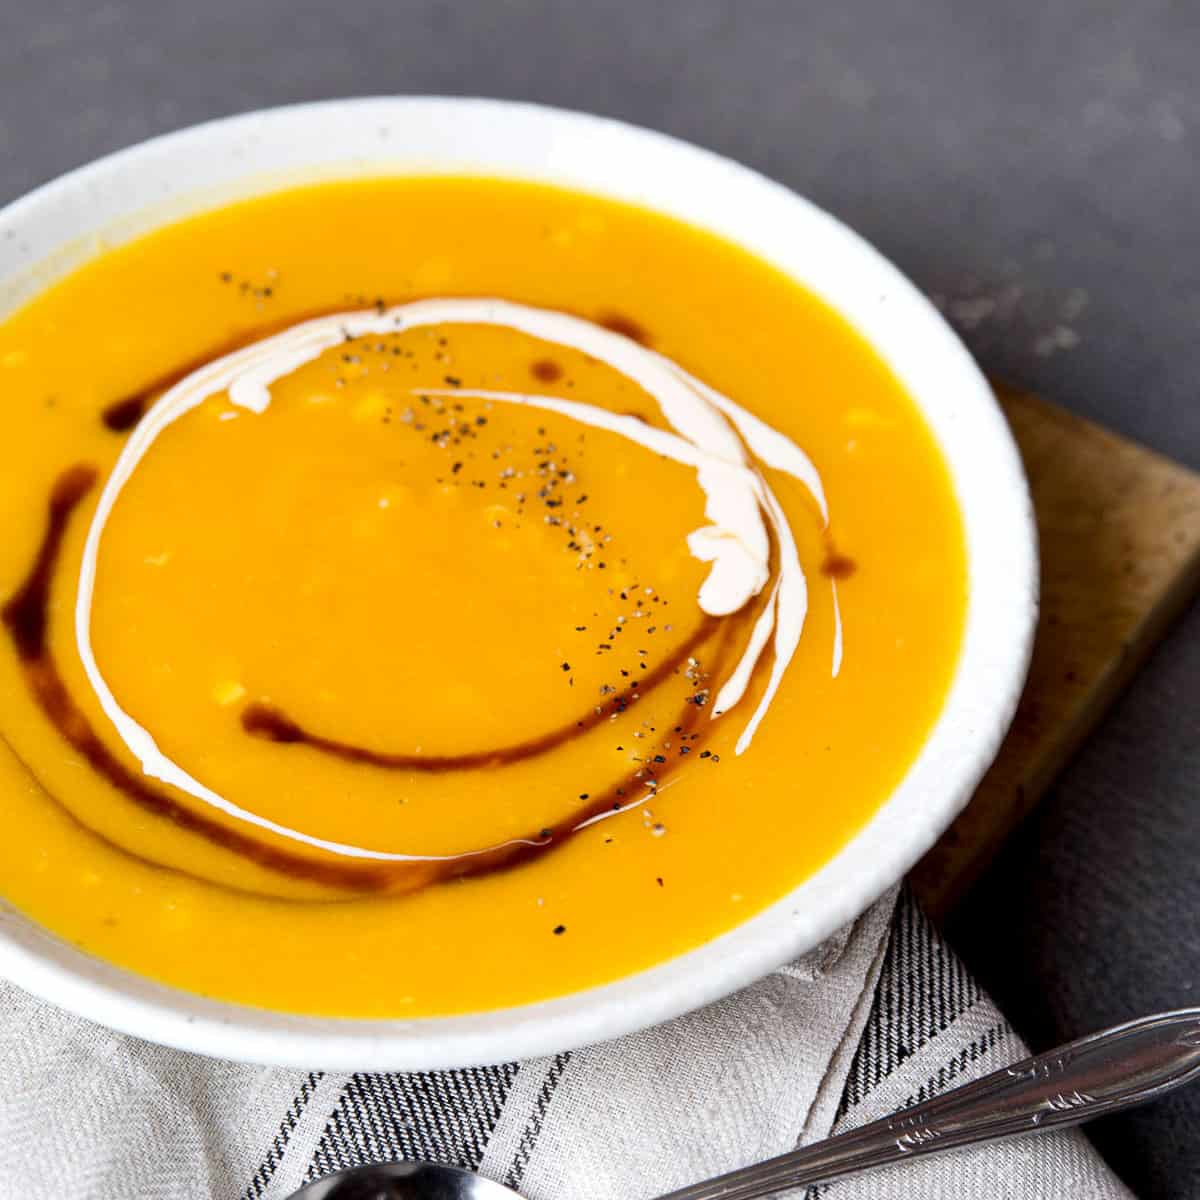 Large bowl of pumpkin soup with swirls.